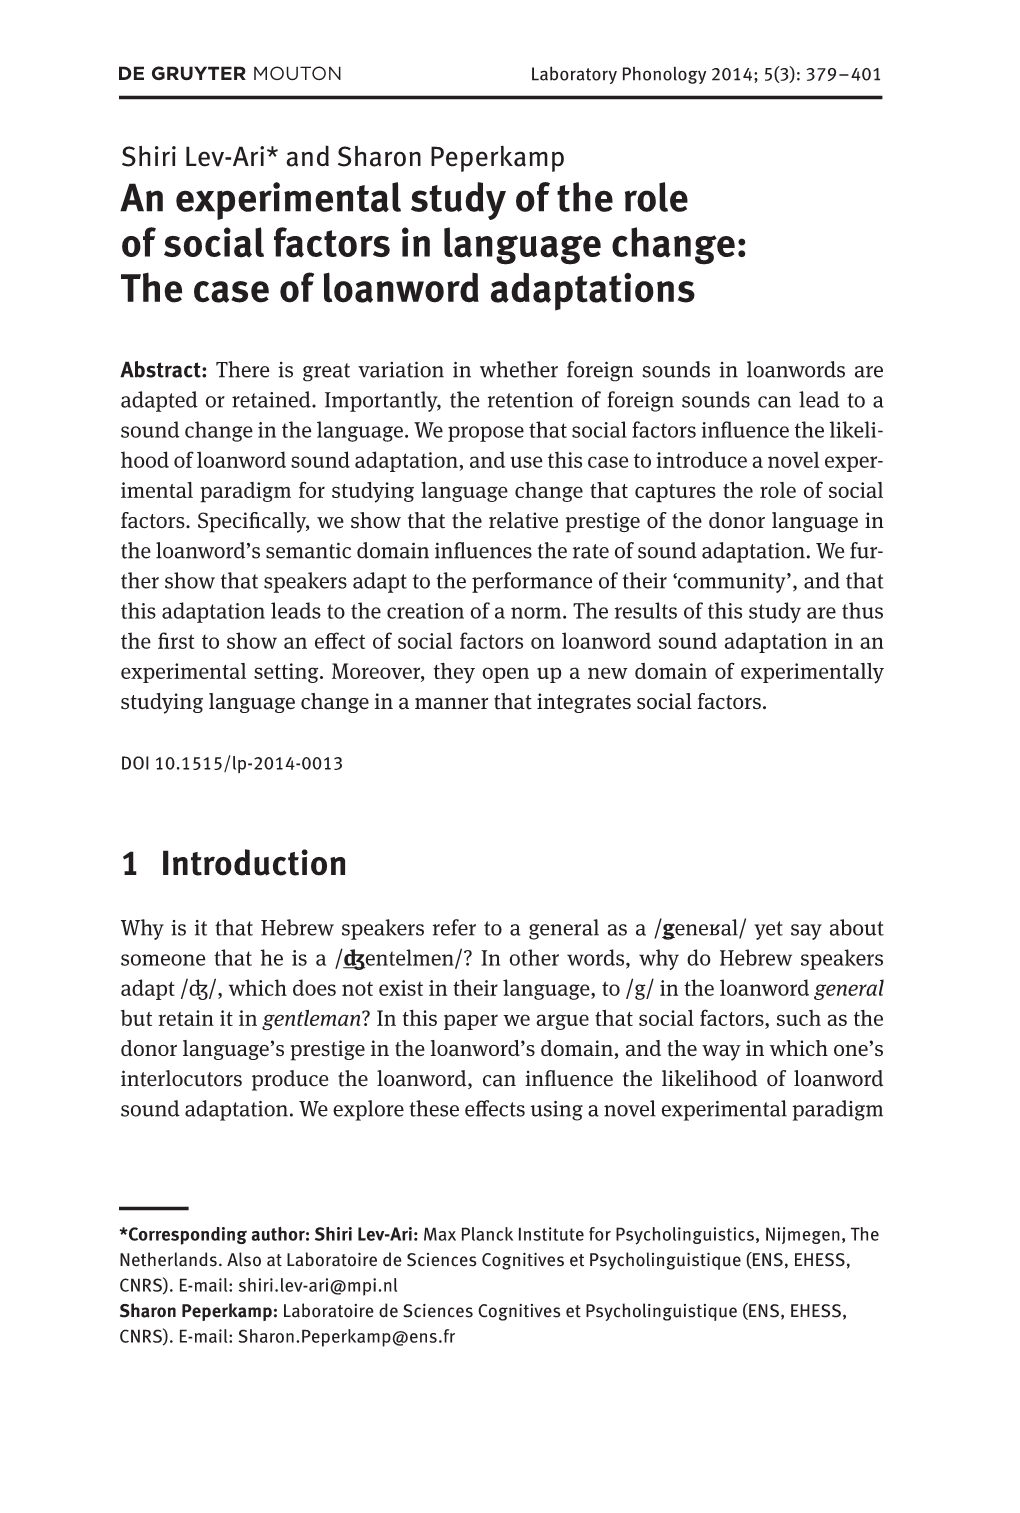 An Experimental Study of the Role of Social Factors in Language Change: the Case of Loanword Adaptations